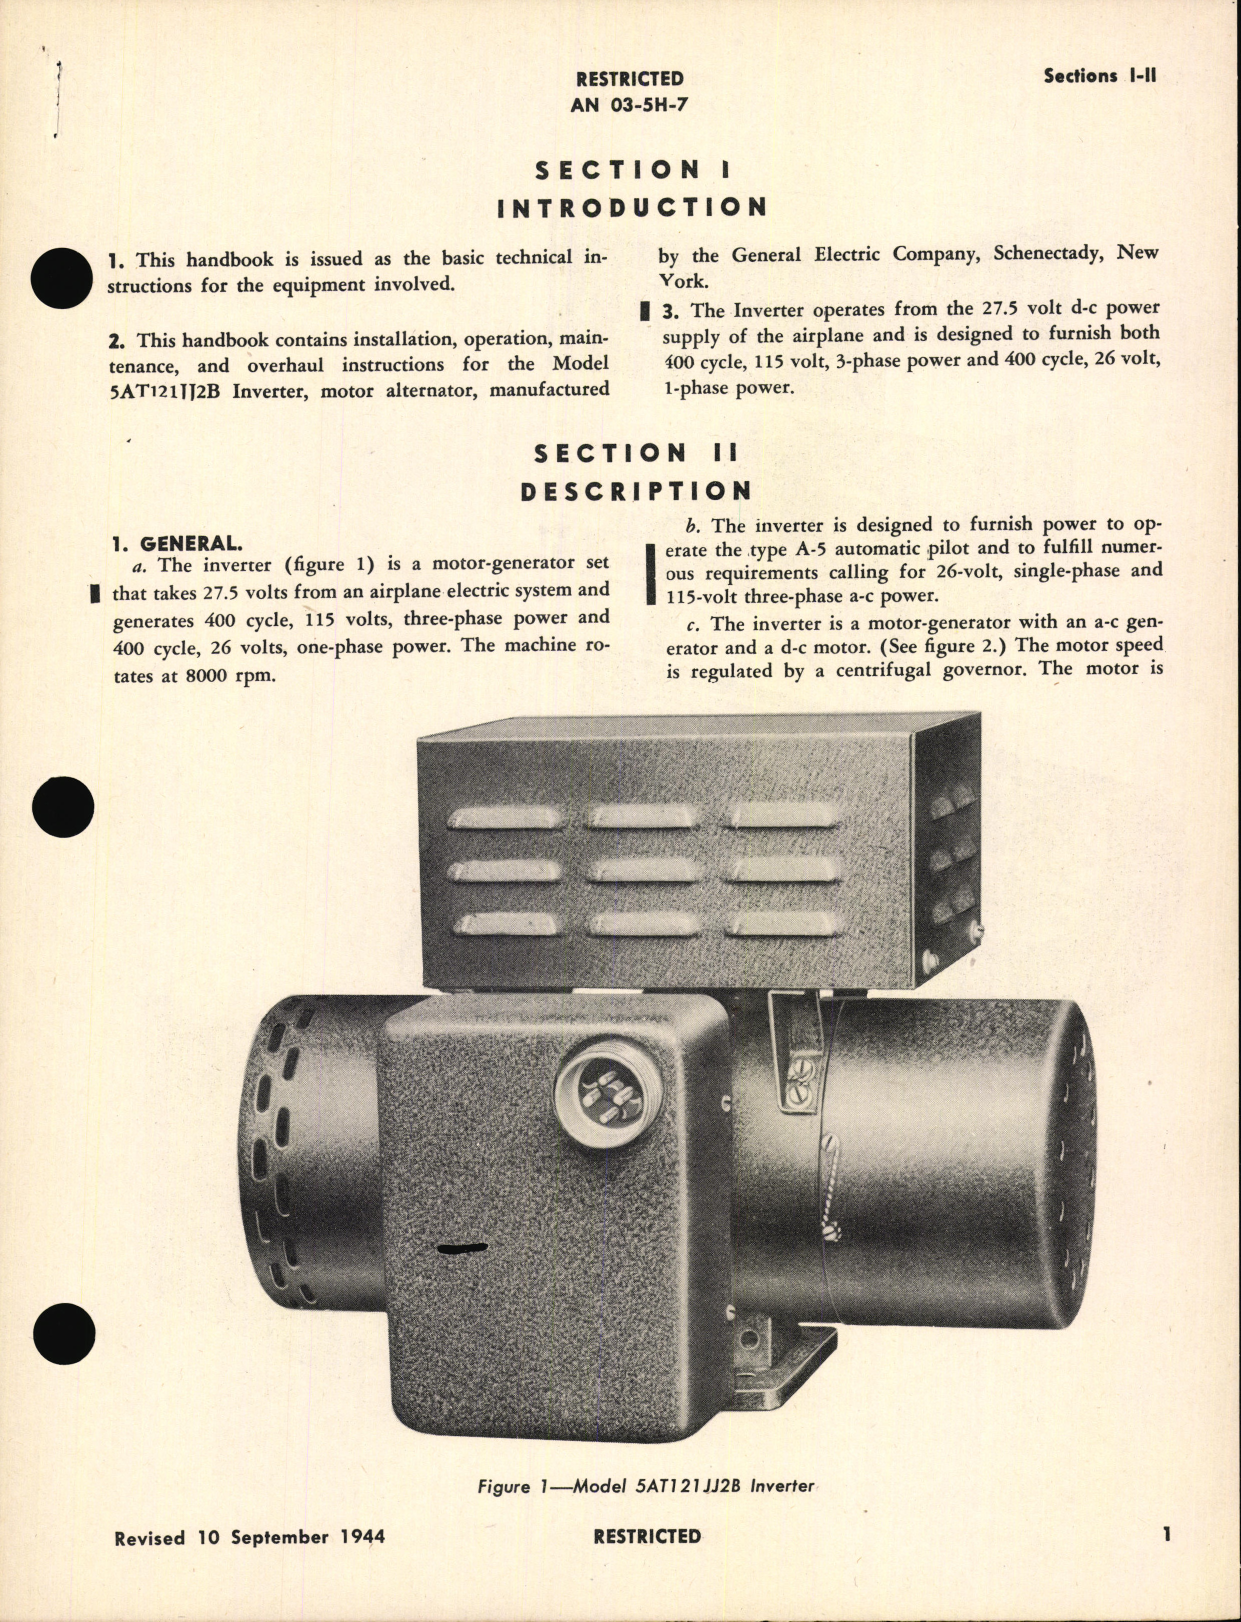 Sample page 5 from AirCorps Library document: Handbook of Instructions with Parts Catalog for Model 5AT121JJ2B Inverter